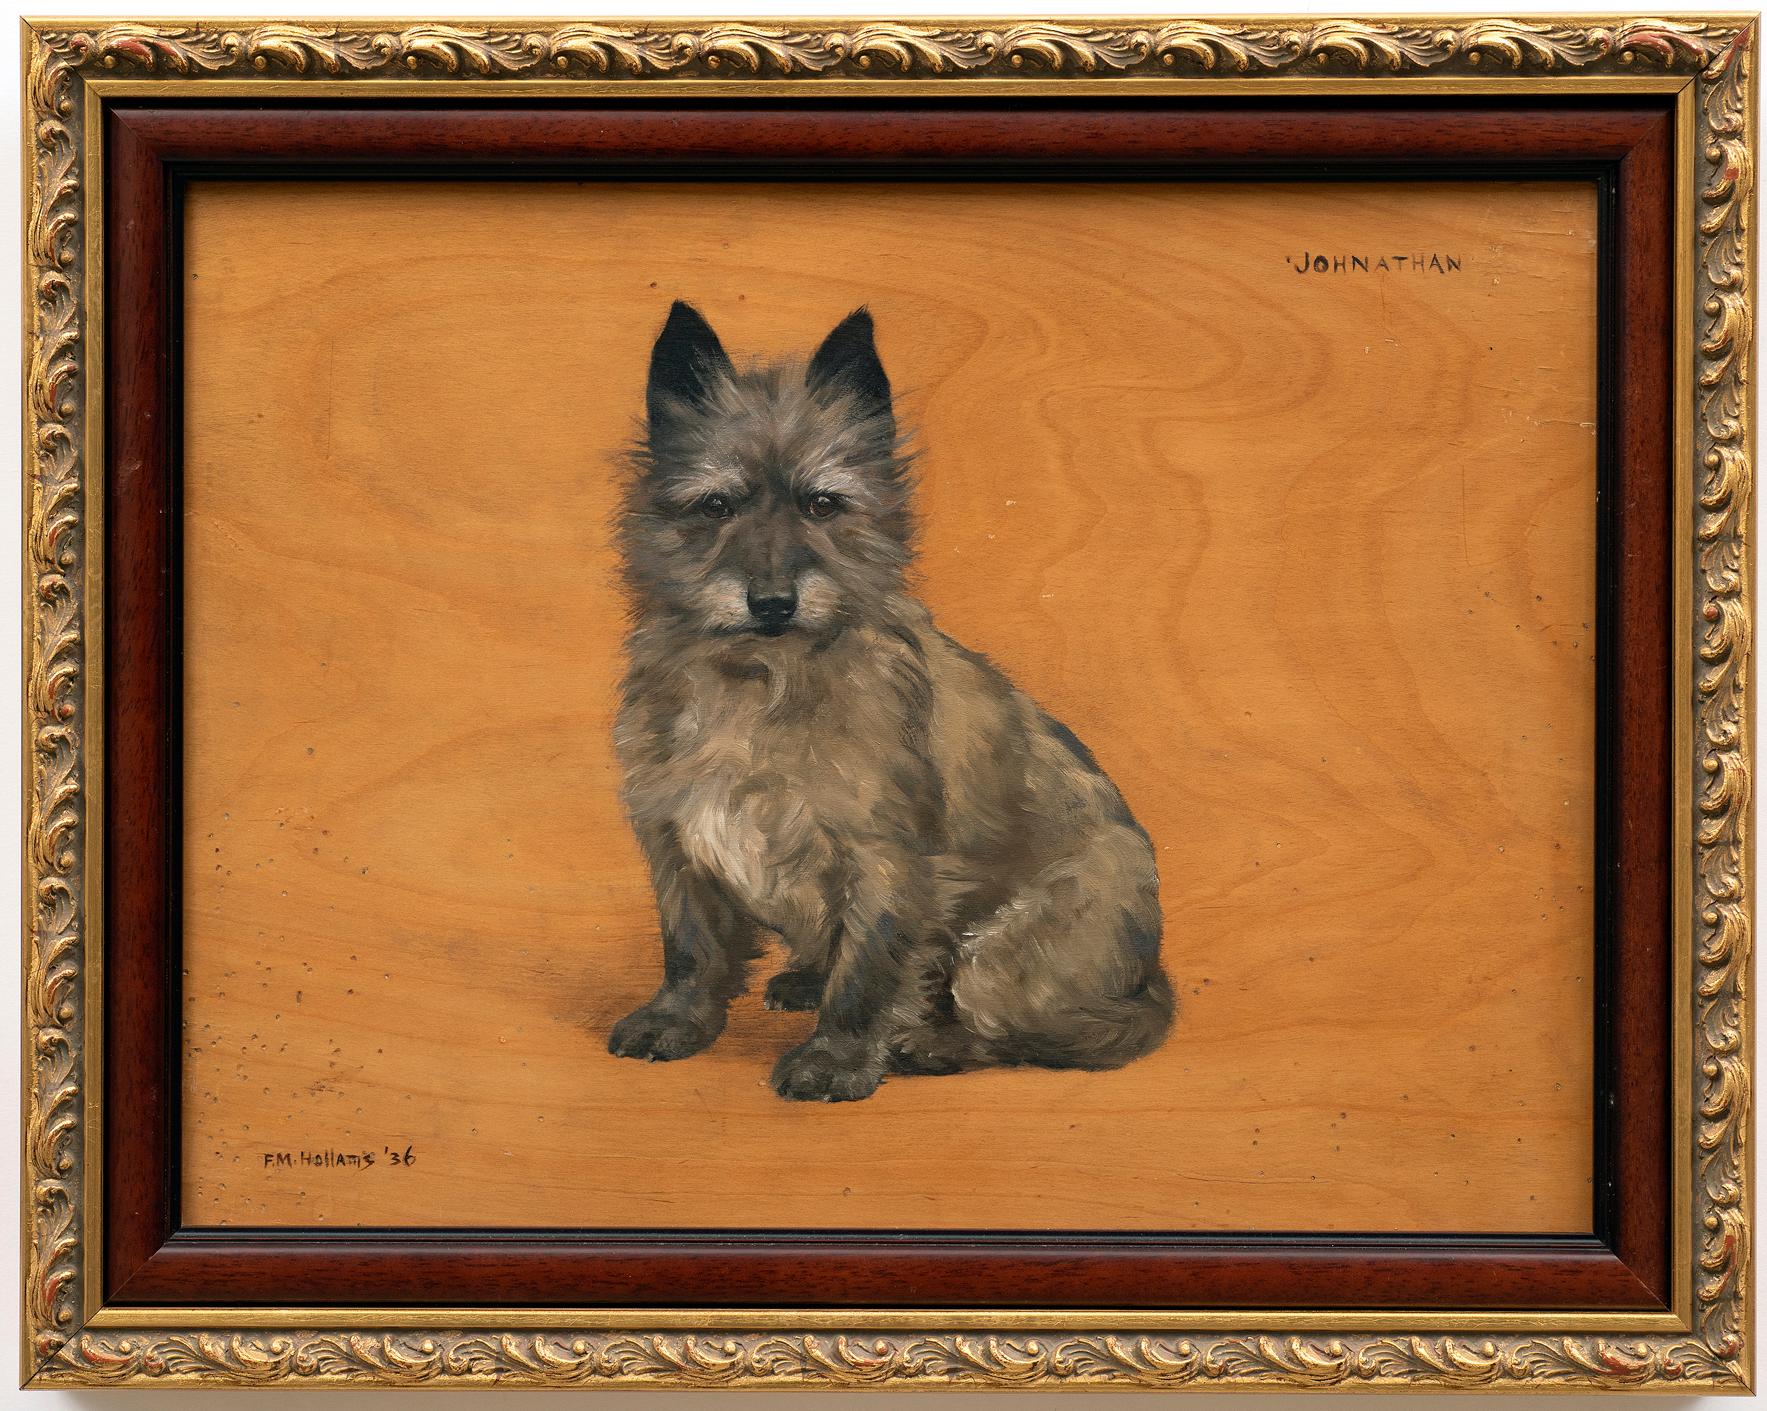 Frances (Florence) Mabel Hollams Animal Painting -  "Johnathan" Cairn Terrier Dog Portrait by Frances Mabel Hollams (Eng.1877-1963)